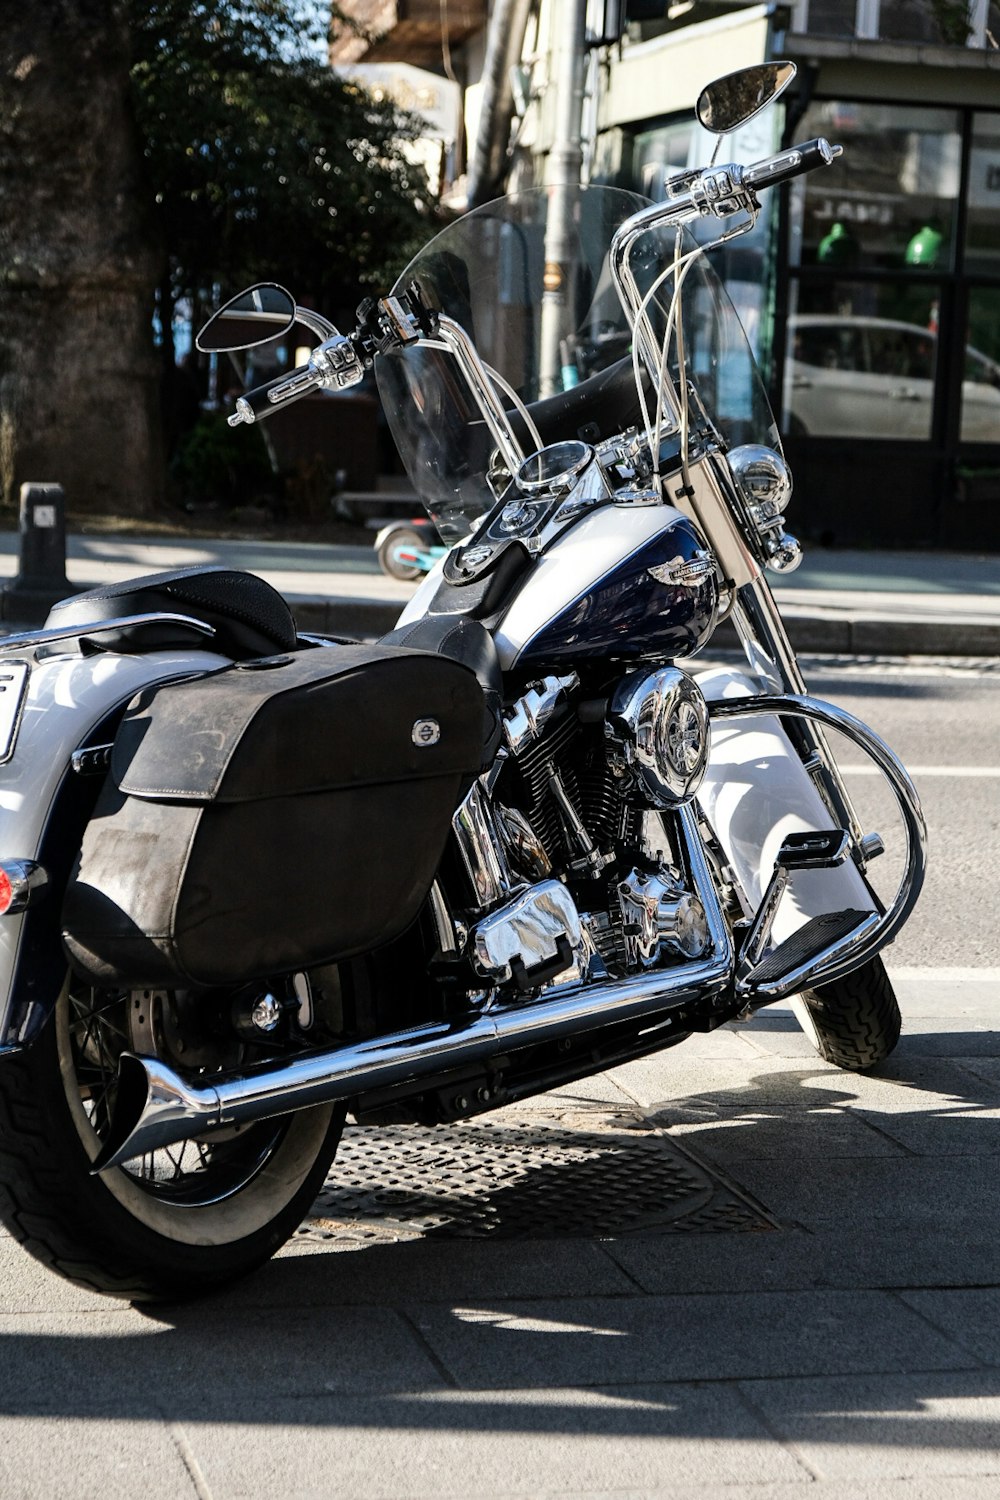 black and silver cruiser motorcycle on road during daytime